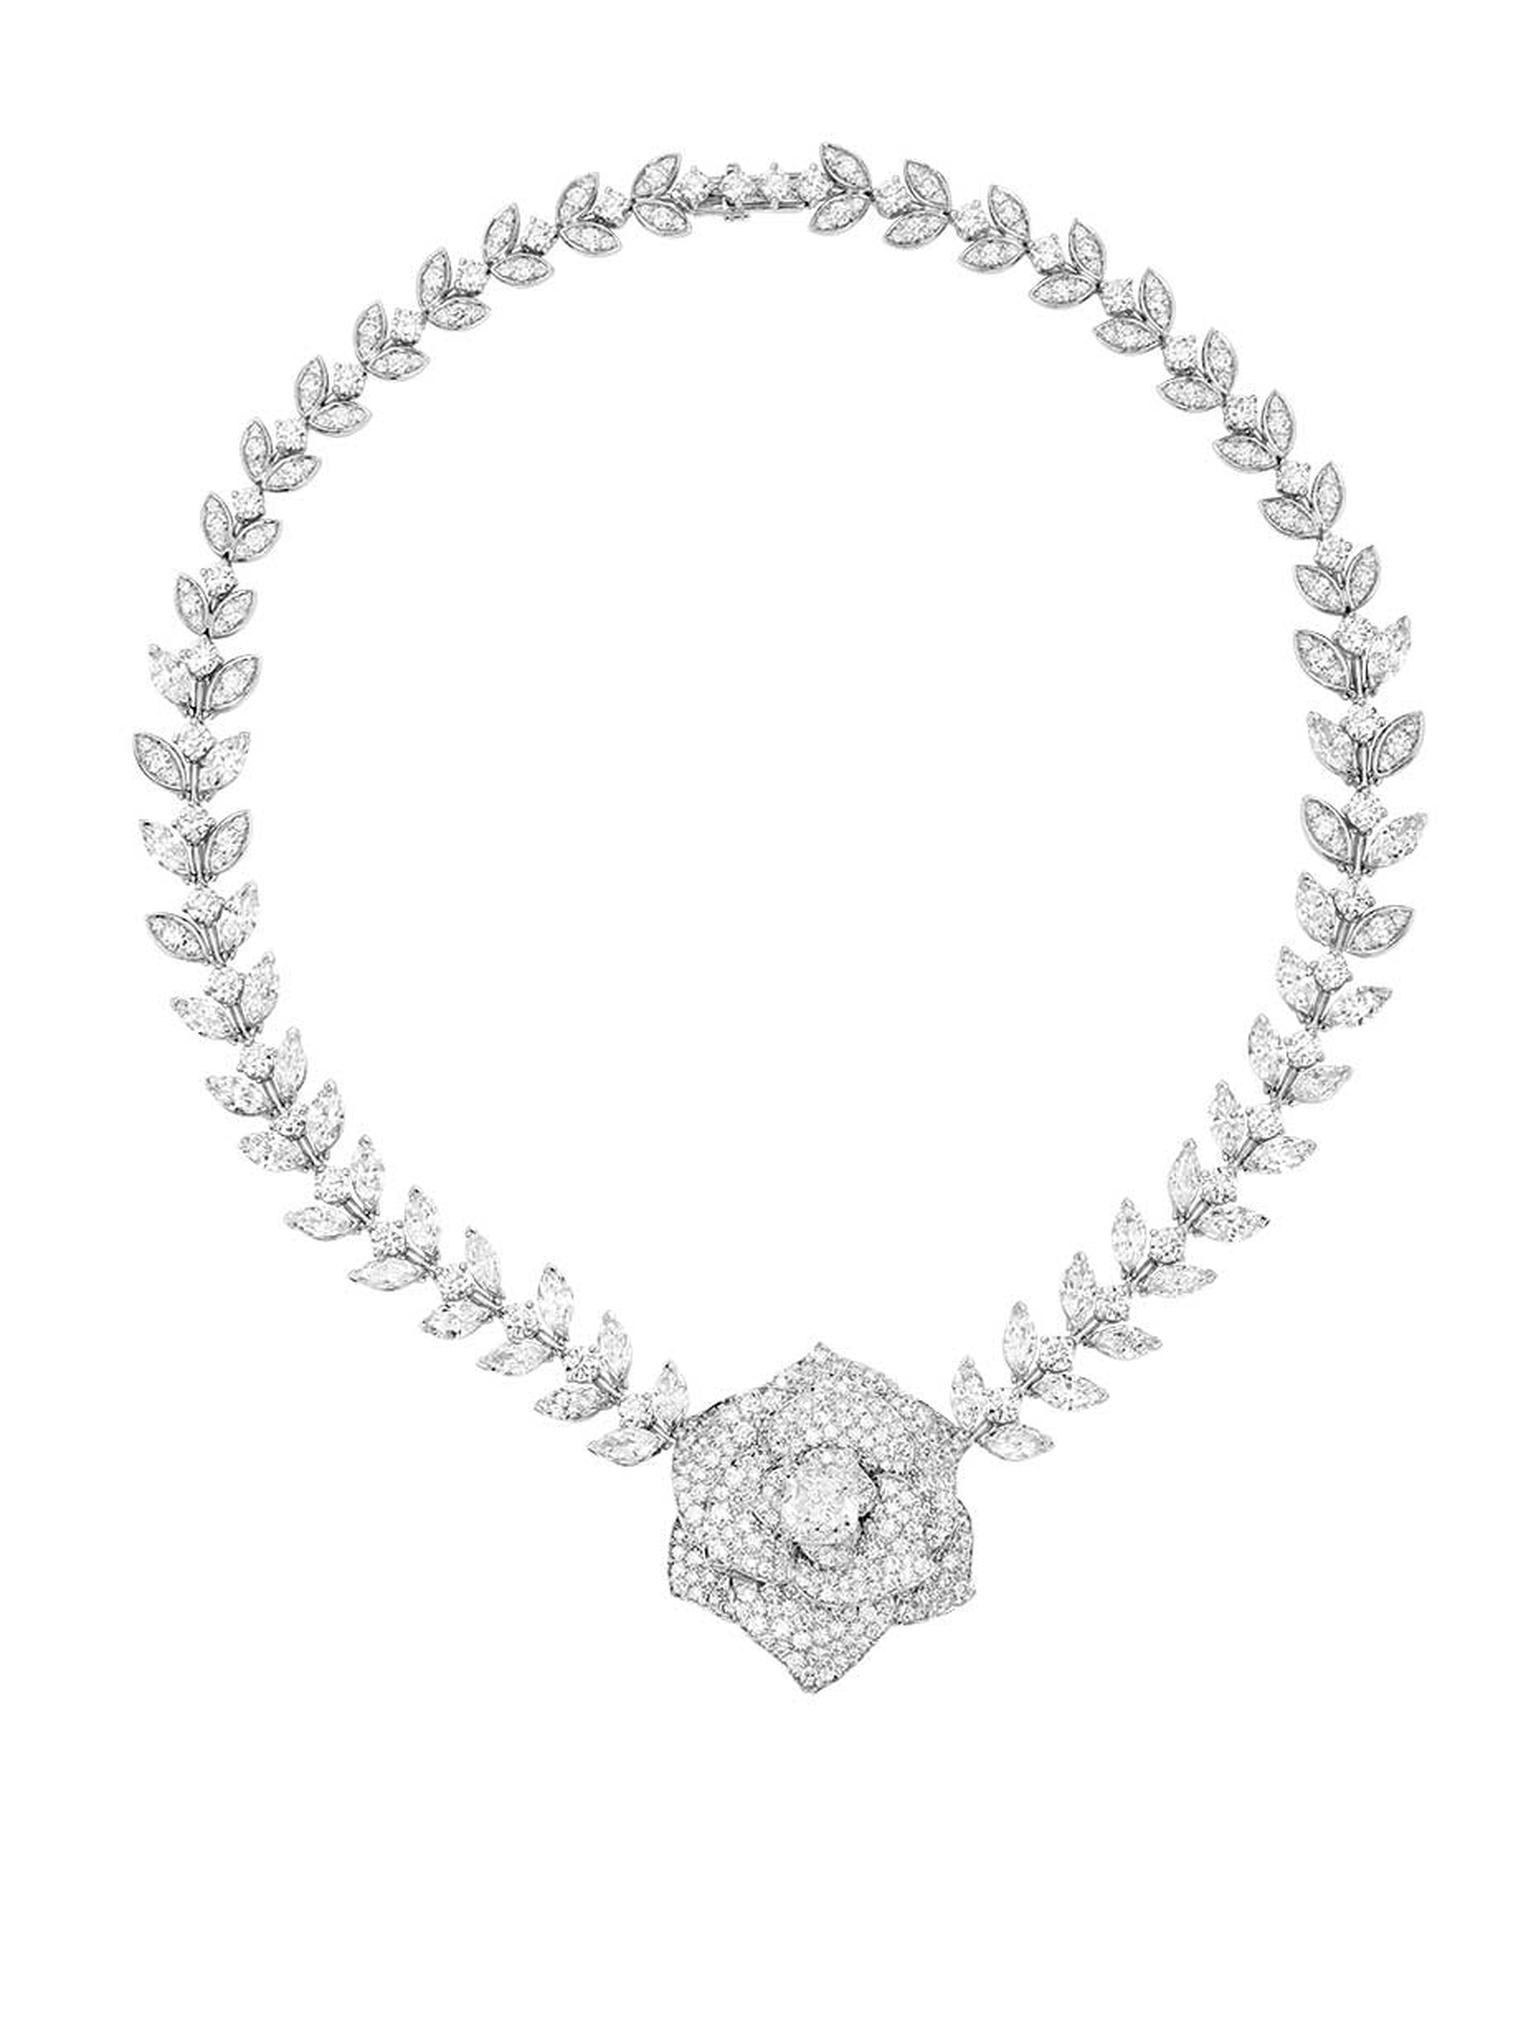 Harrods Presents Three Exclusive Sets From The 14 Piaget Rose Passion Jewellery Collection The Jewellery Editor